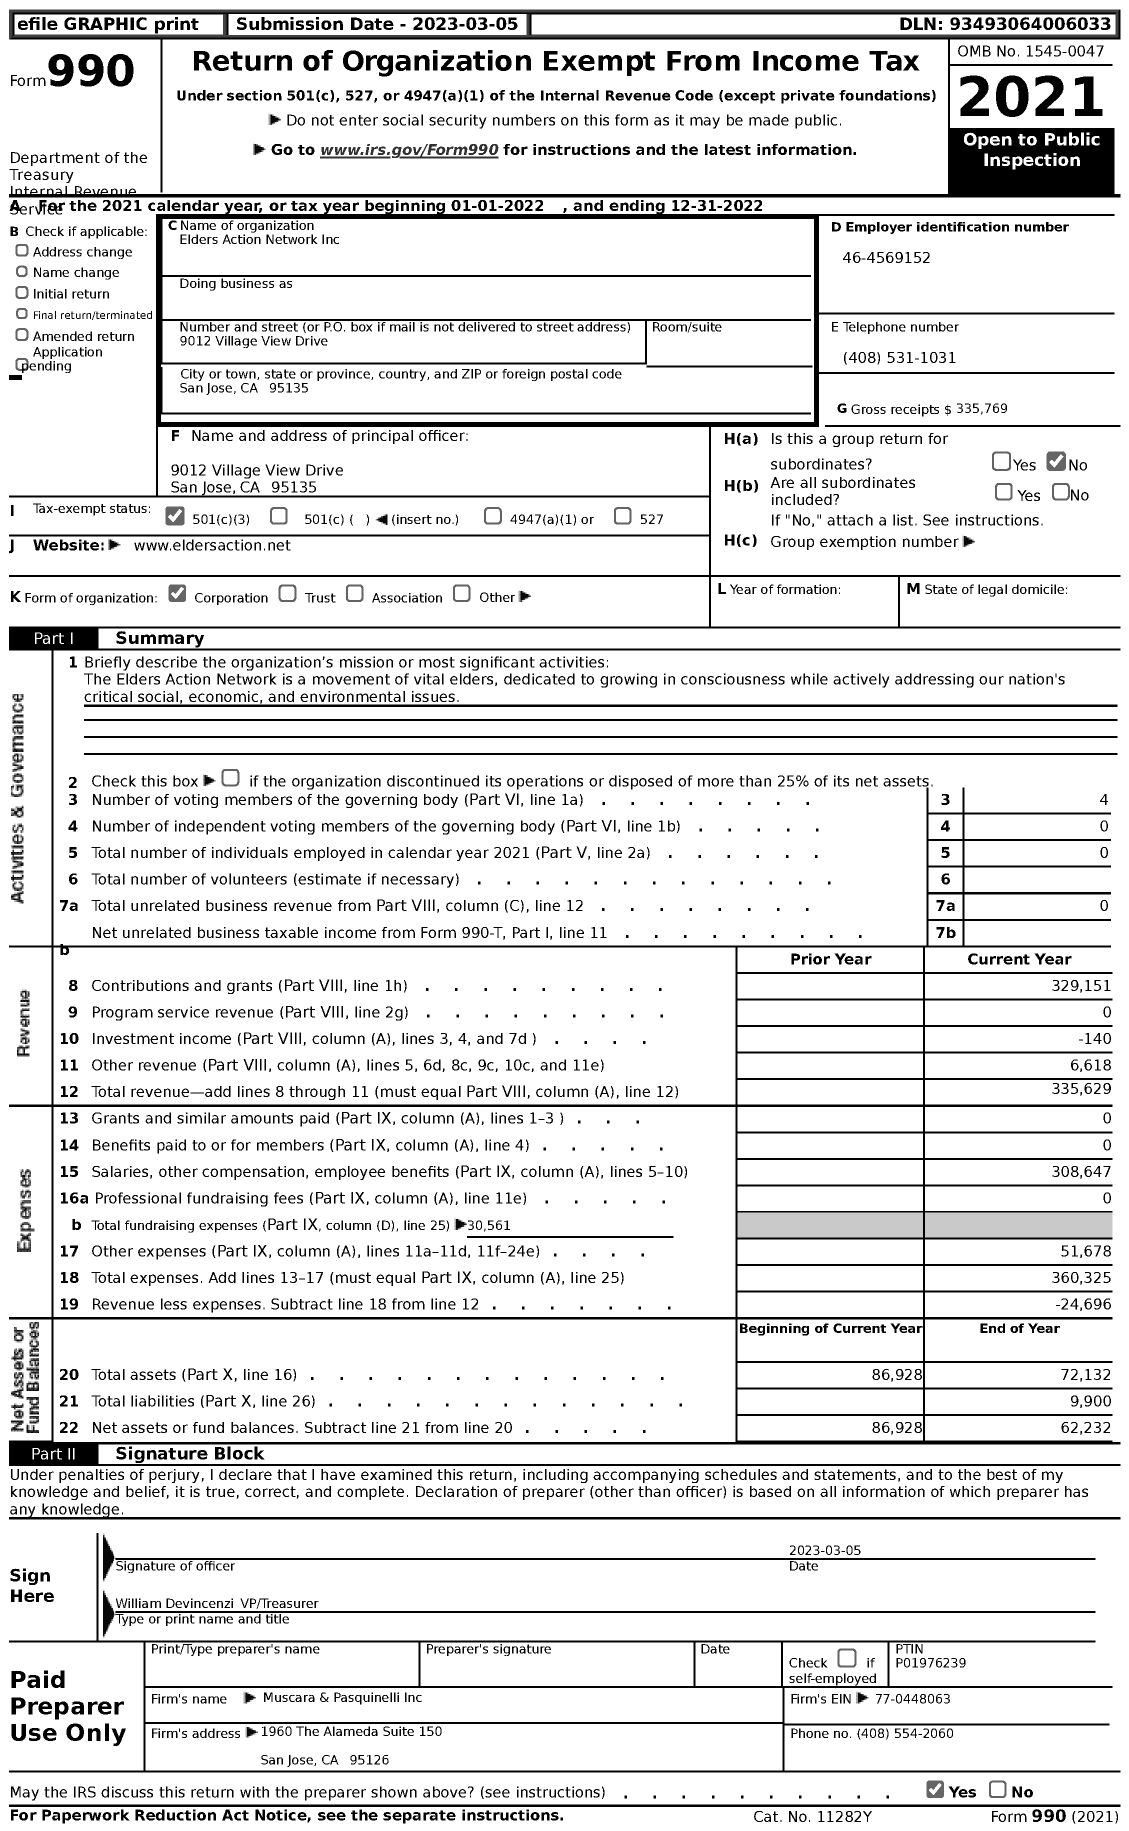 Image of first page of 2022 Form 990 for Elders Action Network